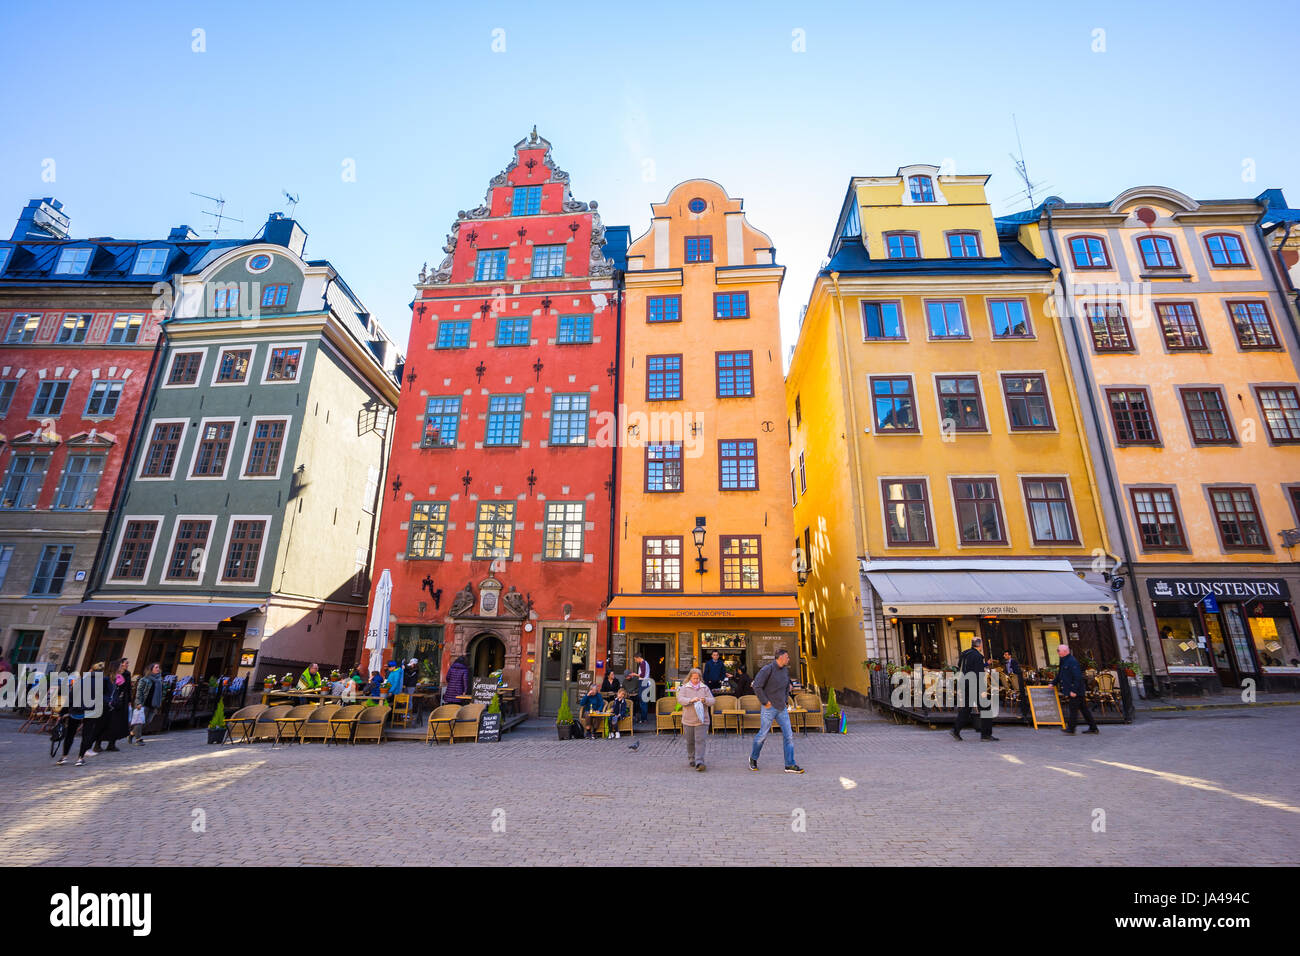 Stockholm, Sweden - May 4, 2017: Gamla Stan, the Old Town, is one of the largest and best preserved medieval city centers in Europe, and one of the fo Stock Photo